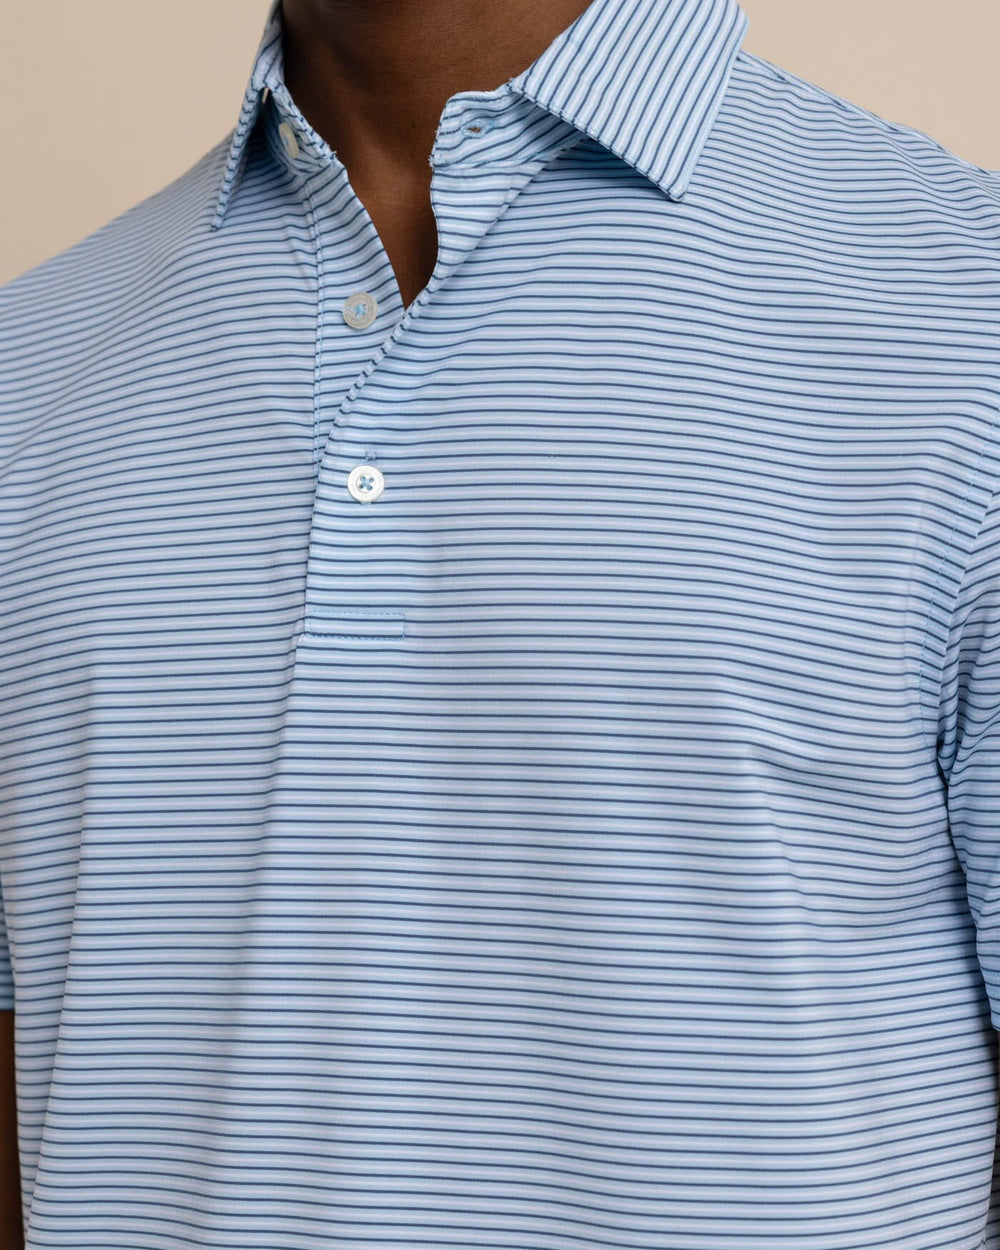 The detail view of the Southern Tide brrr-eeze Baytop Stripe Performance Polo by Southern Tide - Clearwater Blue